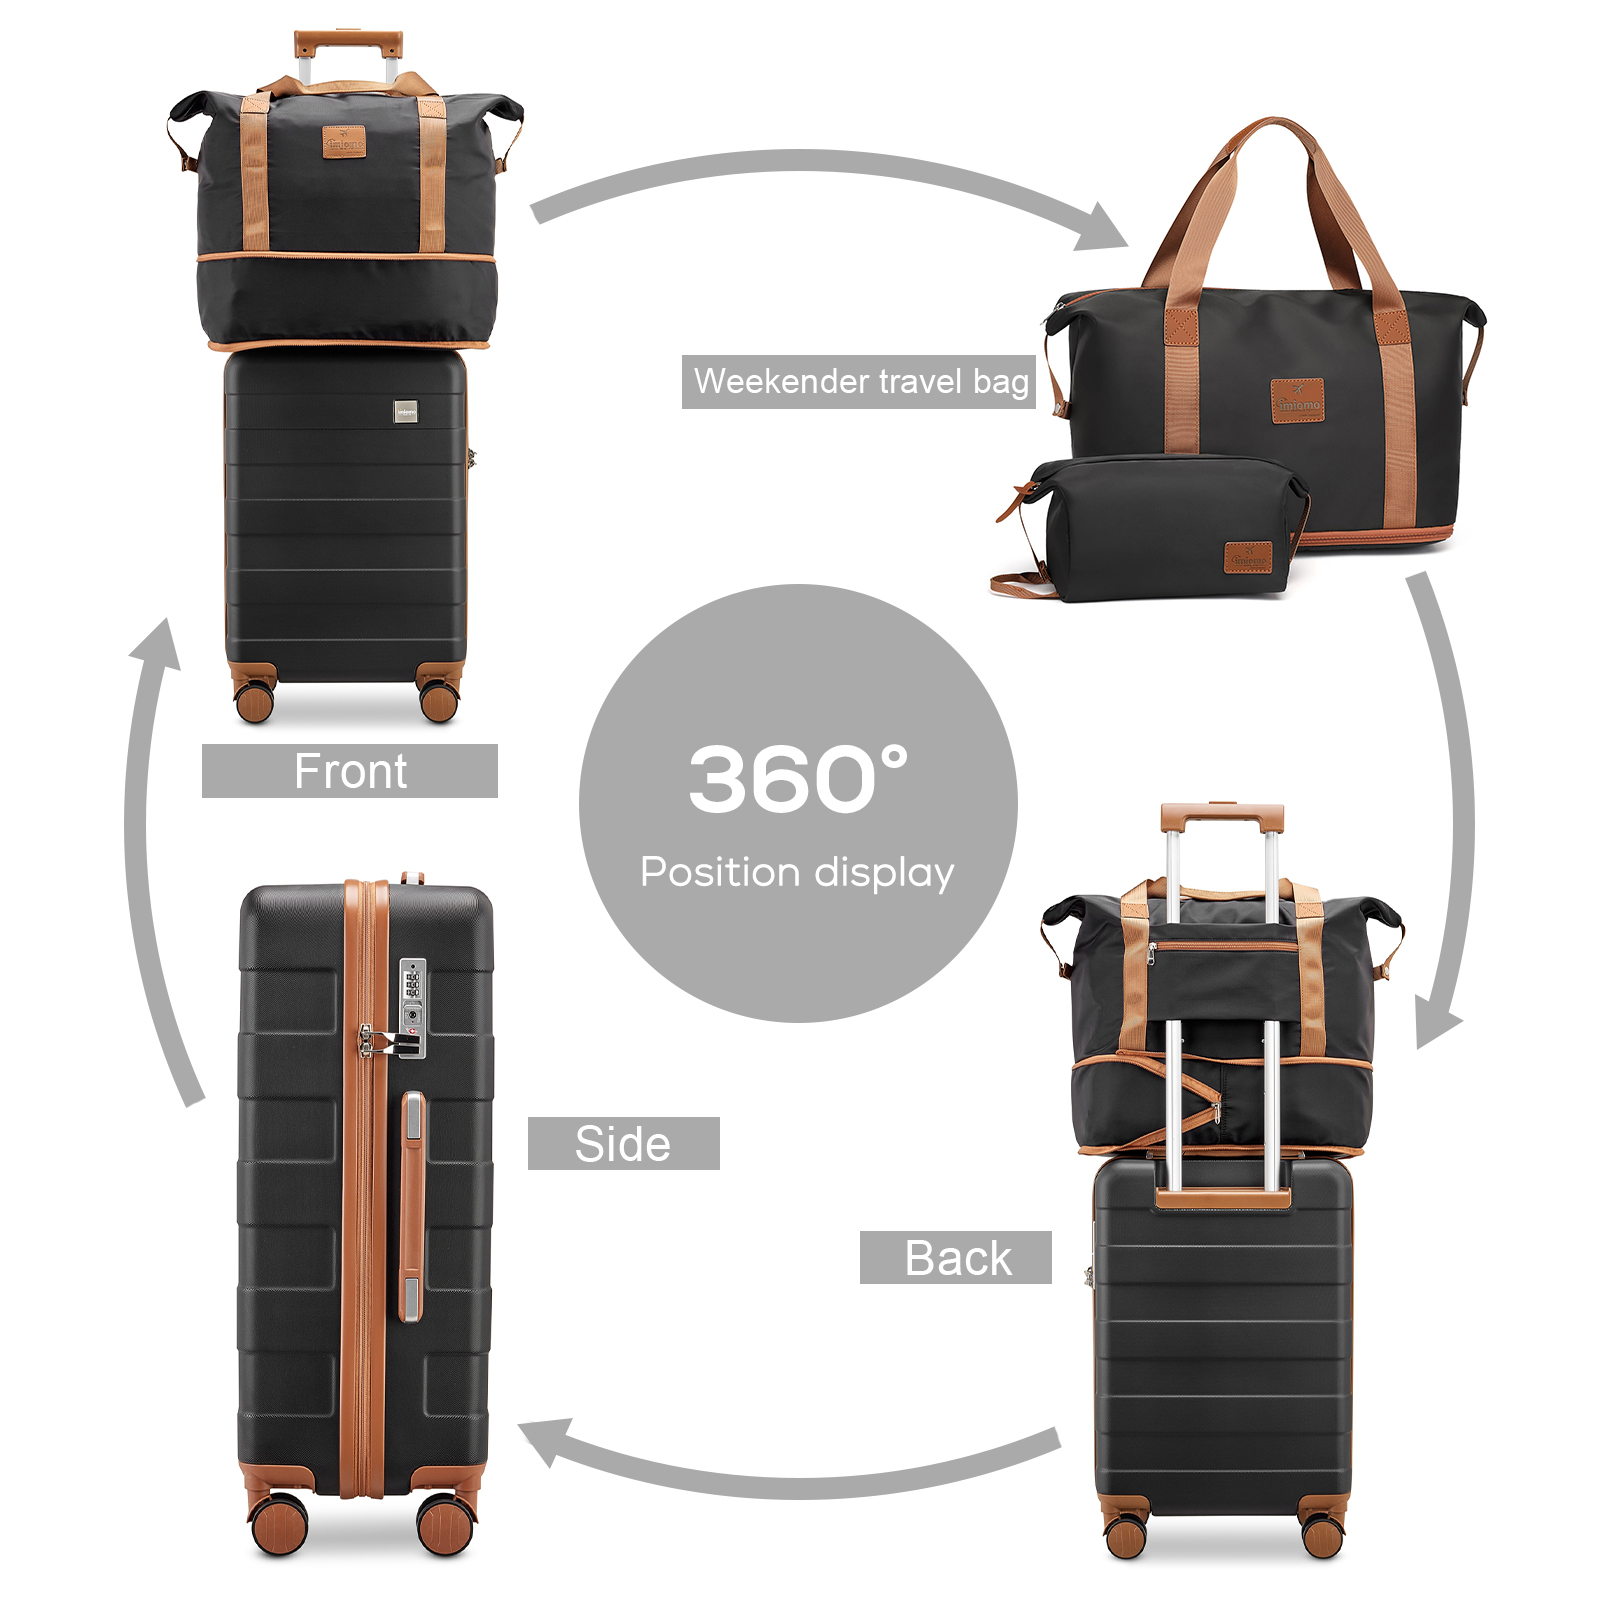 imiomo Luggage, ABS Hard Luggage Set with Spinner Wheels, with TSA Lock, Lightweight and Durable (Unisex) - image 3 of 7